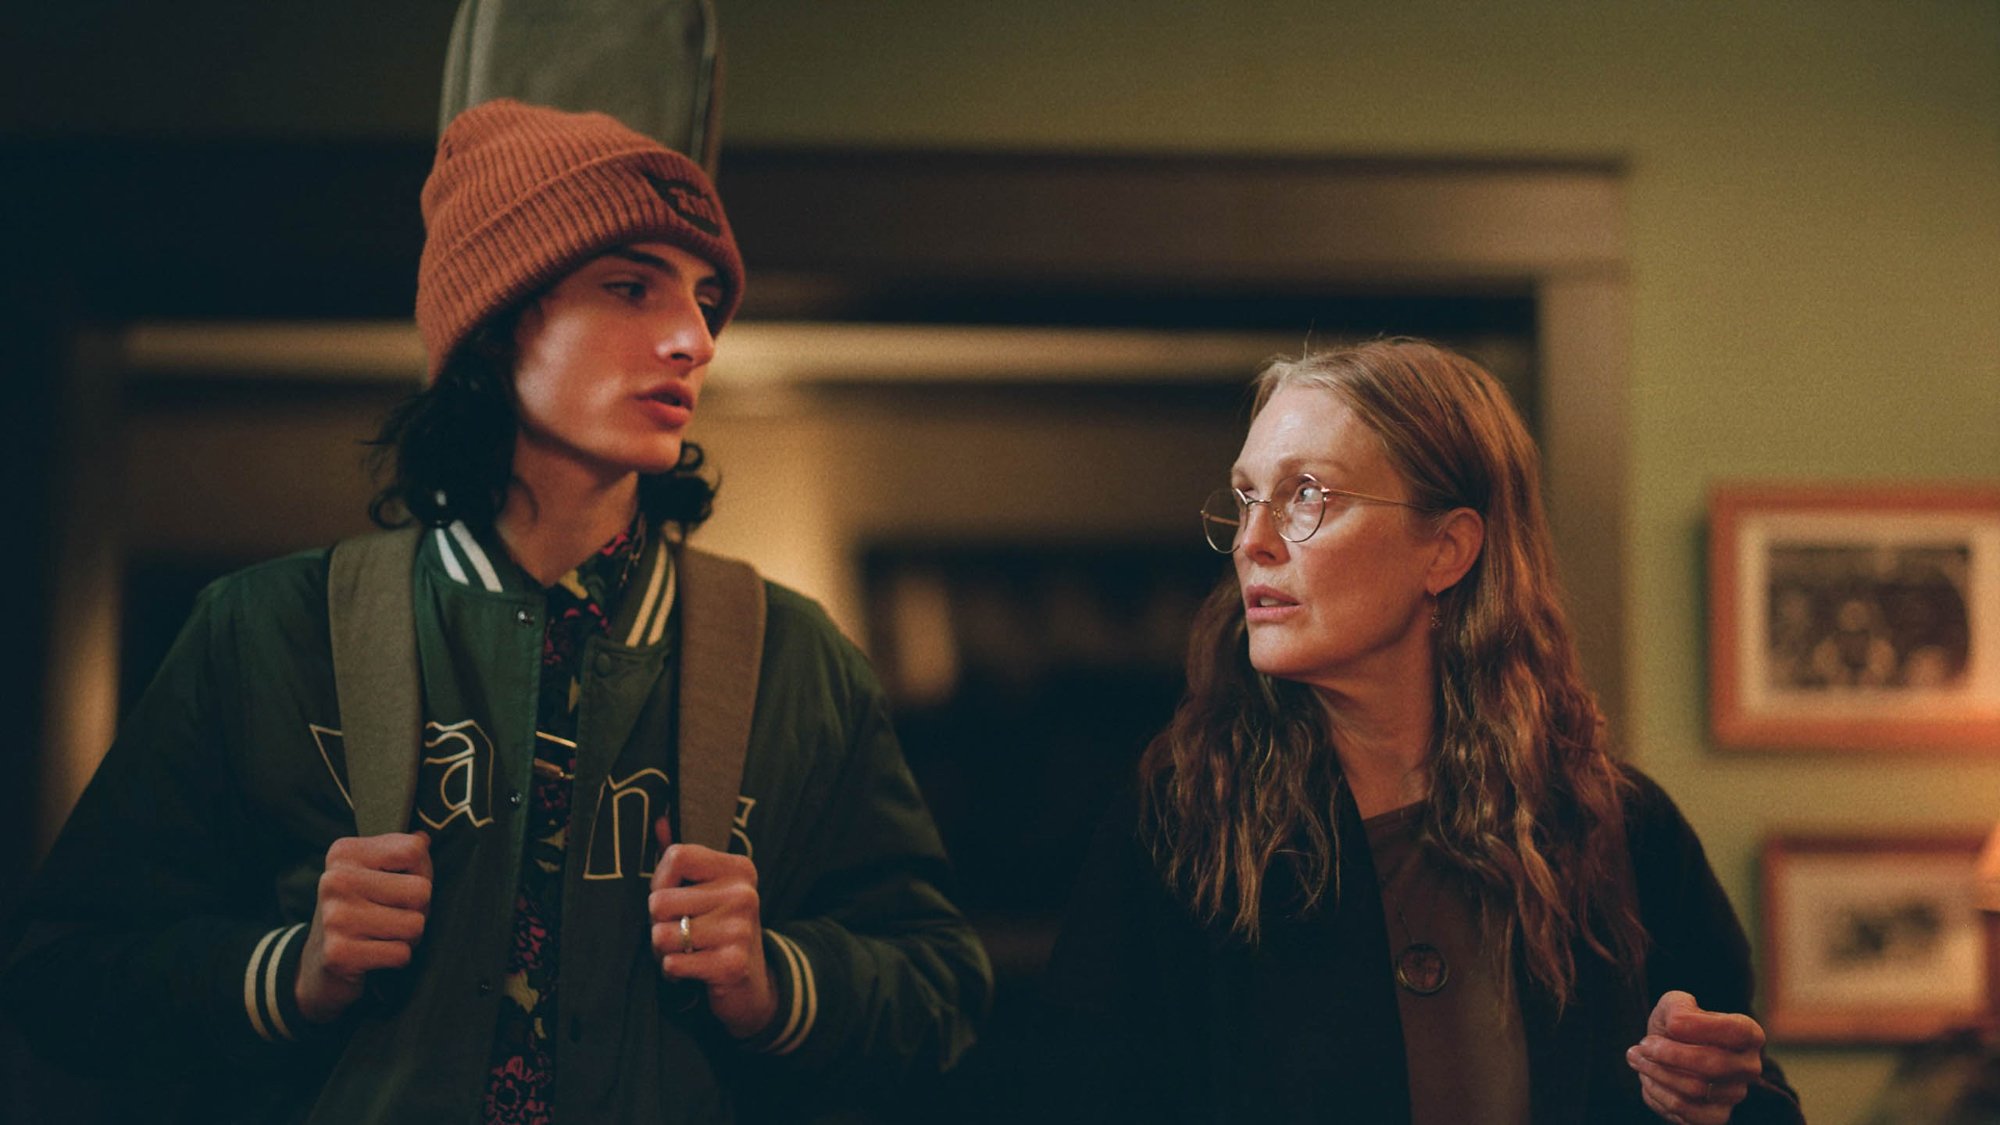 ‘When You Finish Saving the World’: Julianne Moore, Finn Wolfhard Reflect on Playing ‘Rigid’ Roles at Sundance 2022